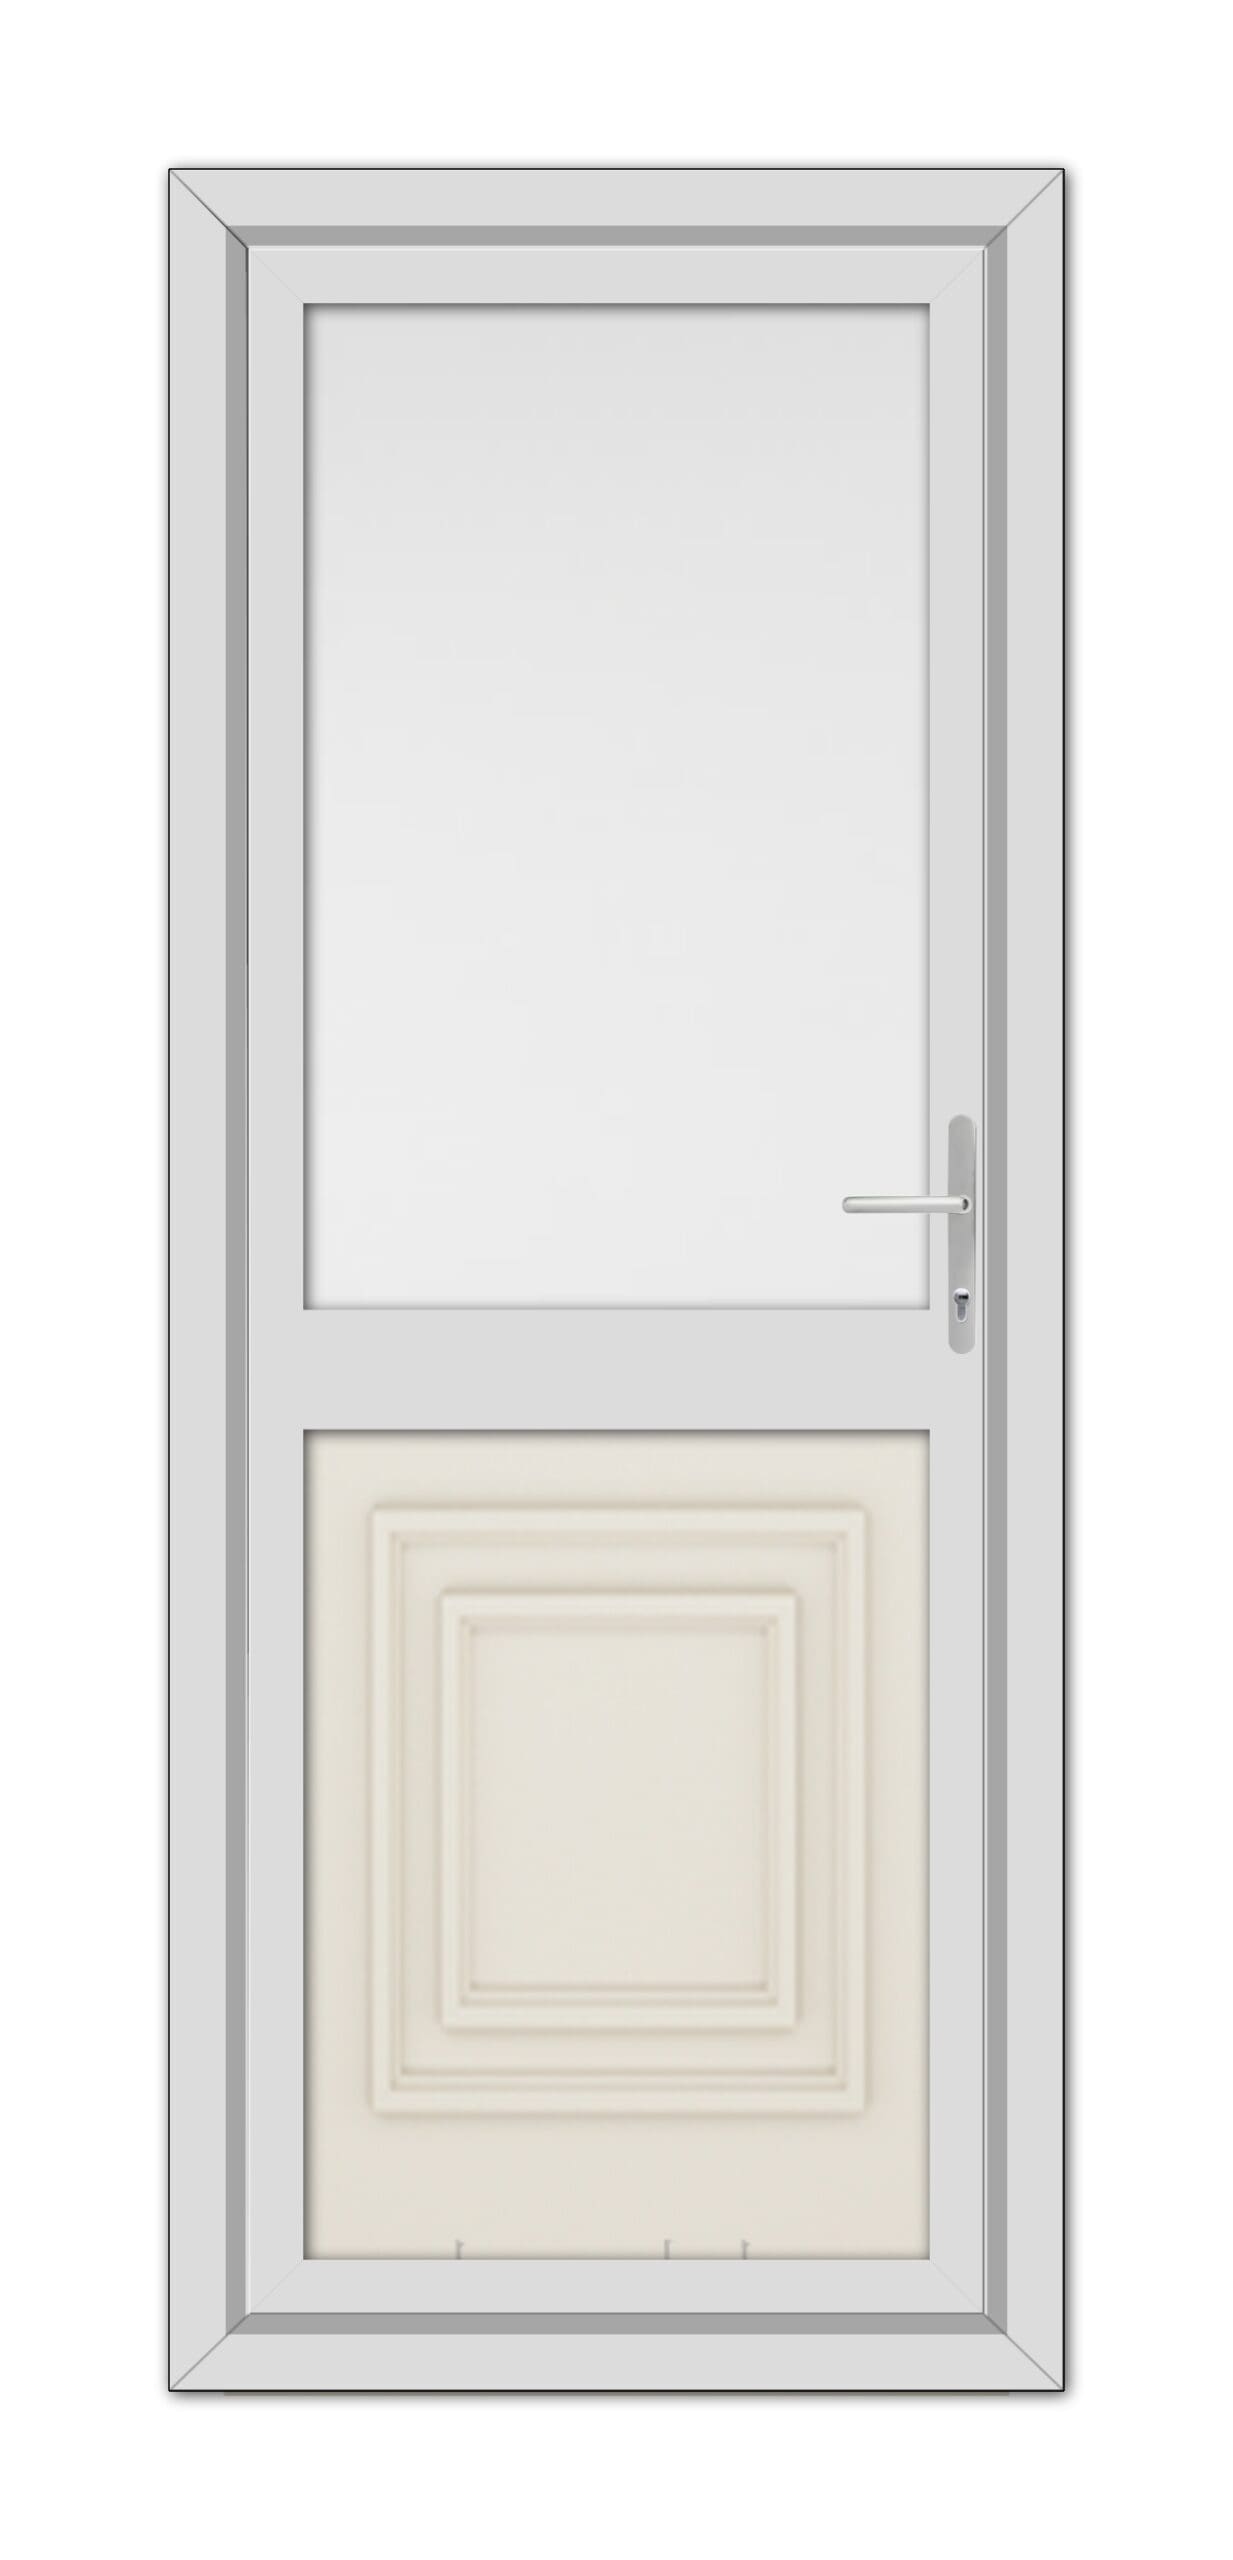 A Cream Hannover Half uPVC Back Door with a large upper window and a rectangular raised panel at the bottom, featuring a sleek handle on the right.